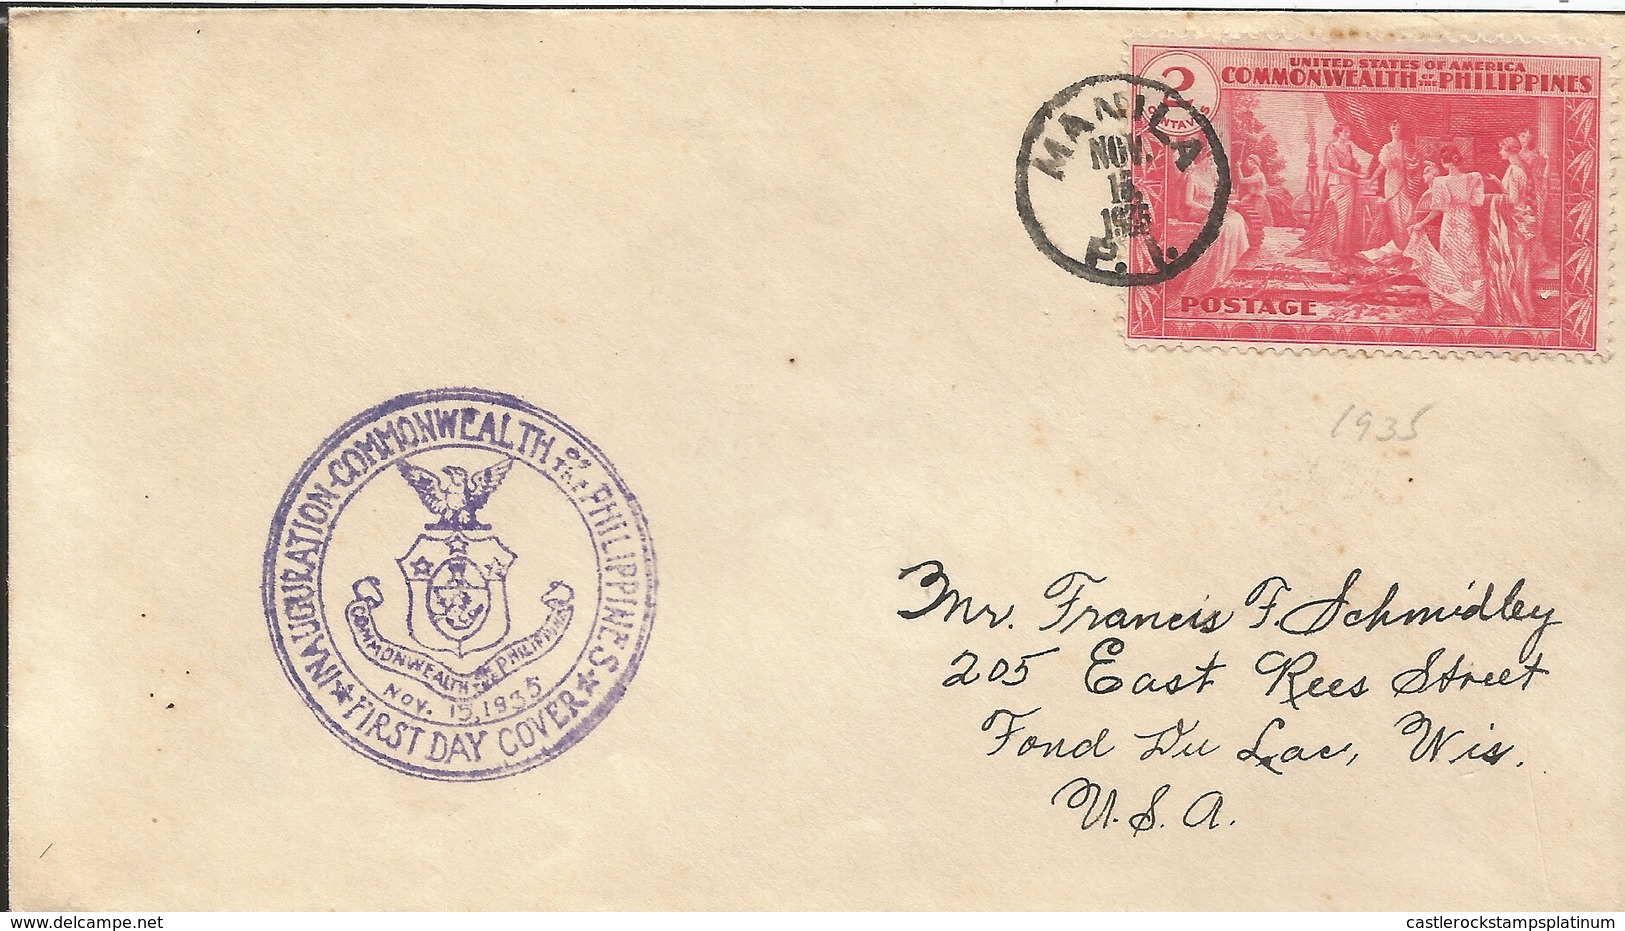 L) 1935 PHILIPPINES. UNITED STATES OF AMERICA COMMONWEALTH OF THE PHILIPPINES, 2C, RED, CIRCULATED COVER FROM PHILIPPINE - Philippines